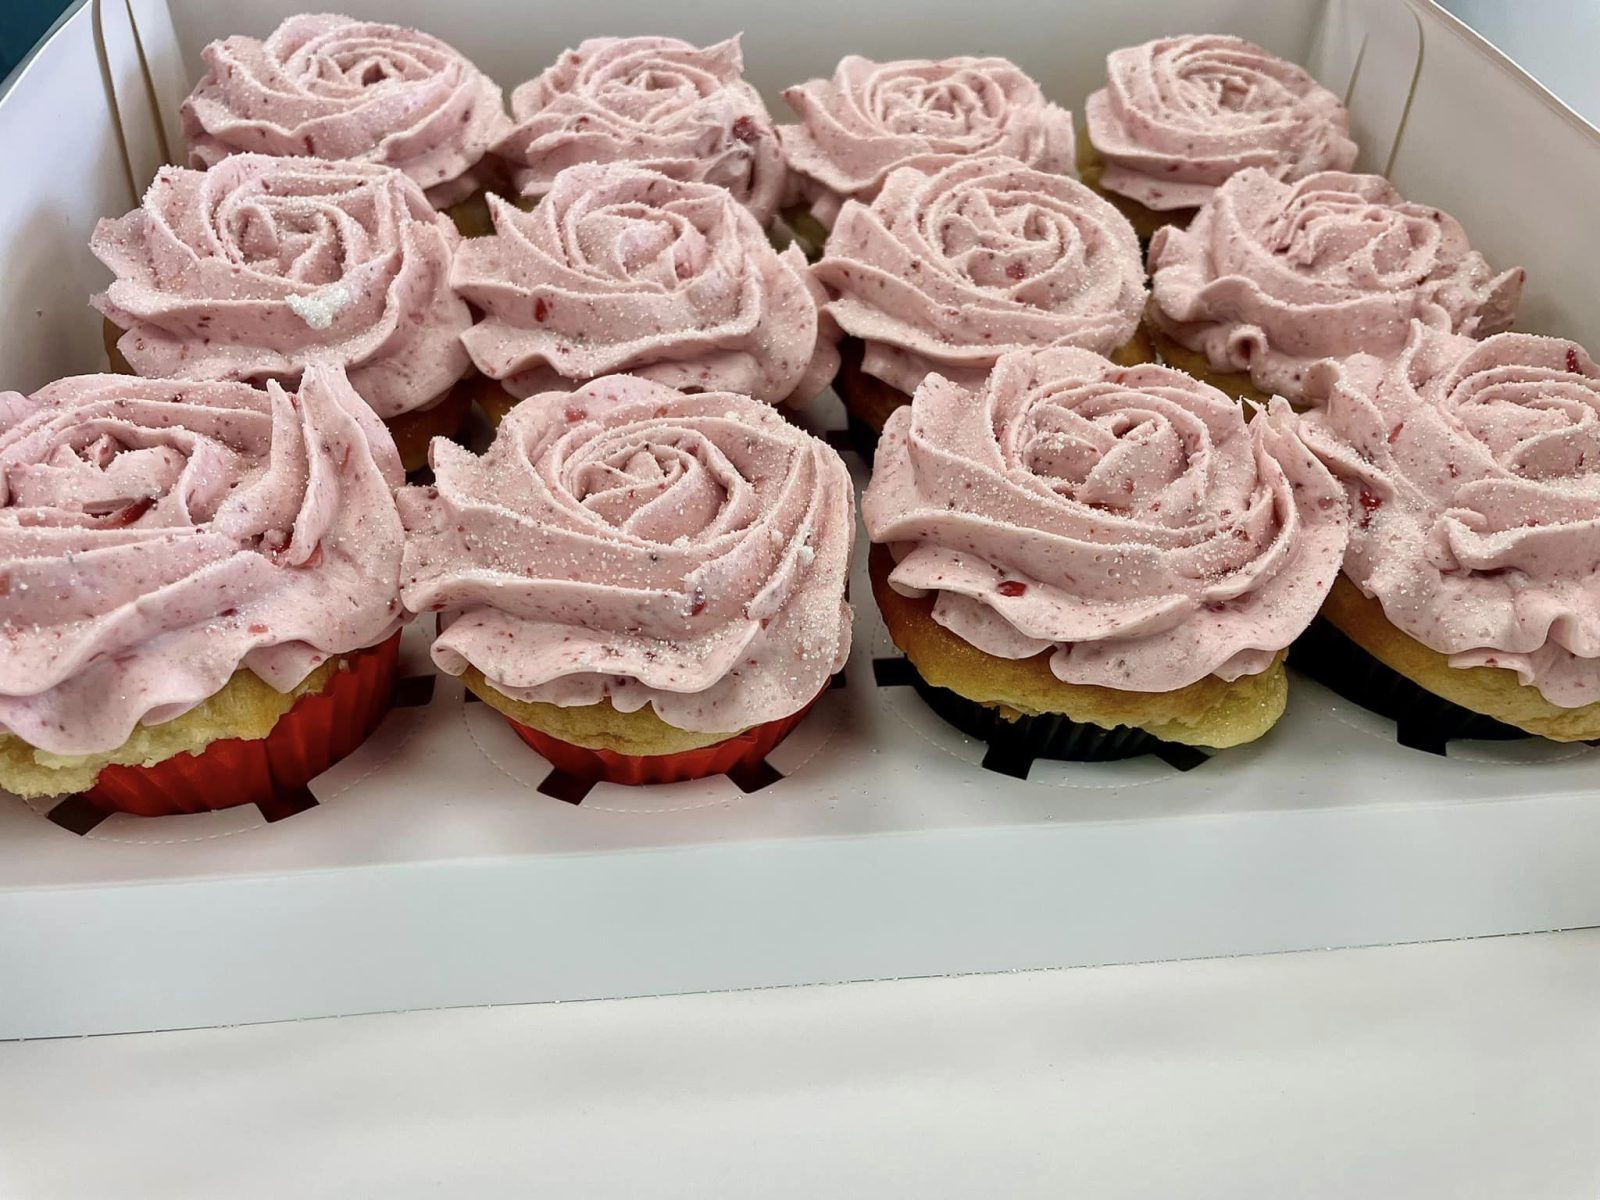 Gluten-free cupcakes with pink frosting from The Sweet Deal in Nixa